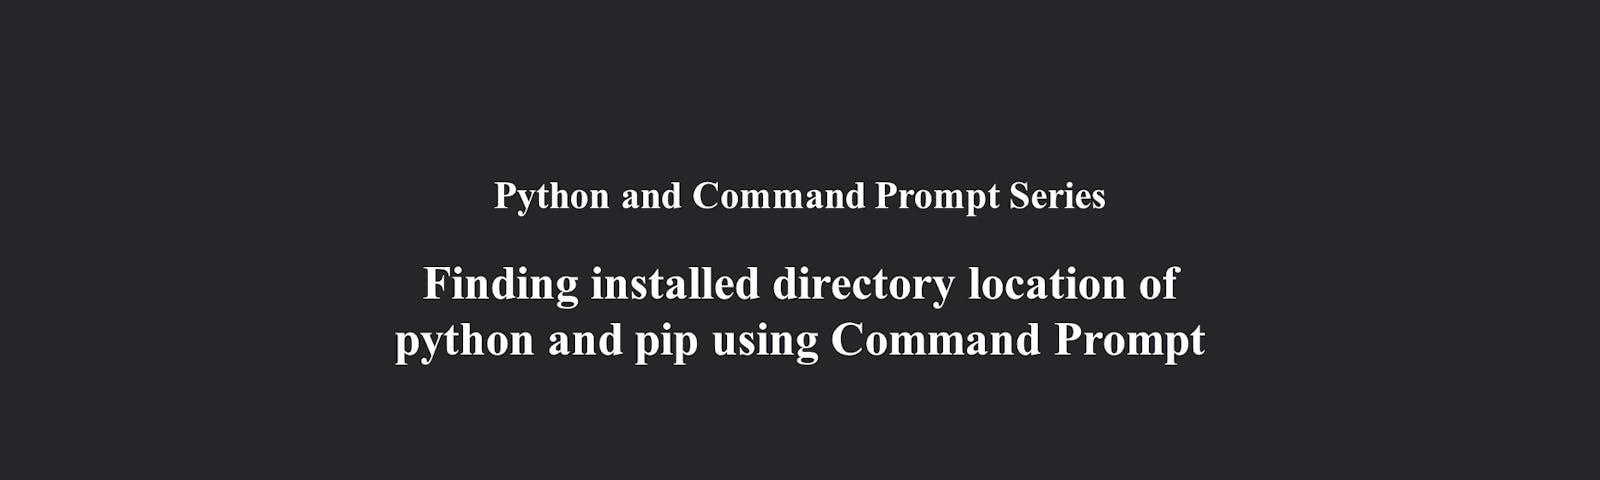 Finding installed directory location of Python and pip using Command Prompt | Python and Command Prompt Series